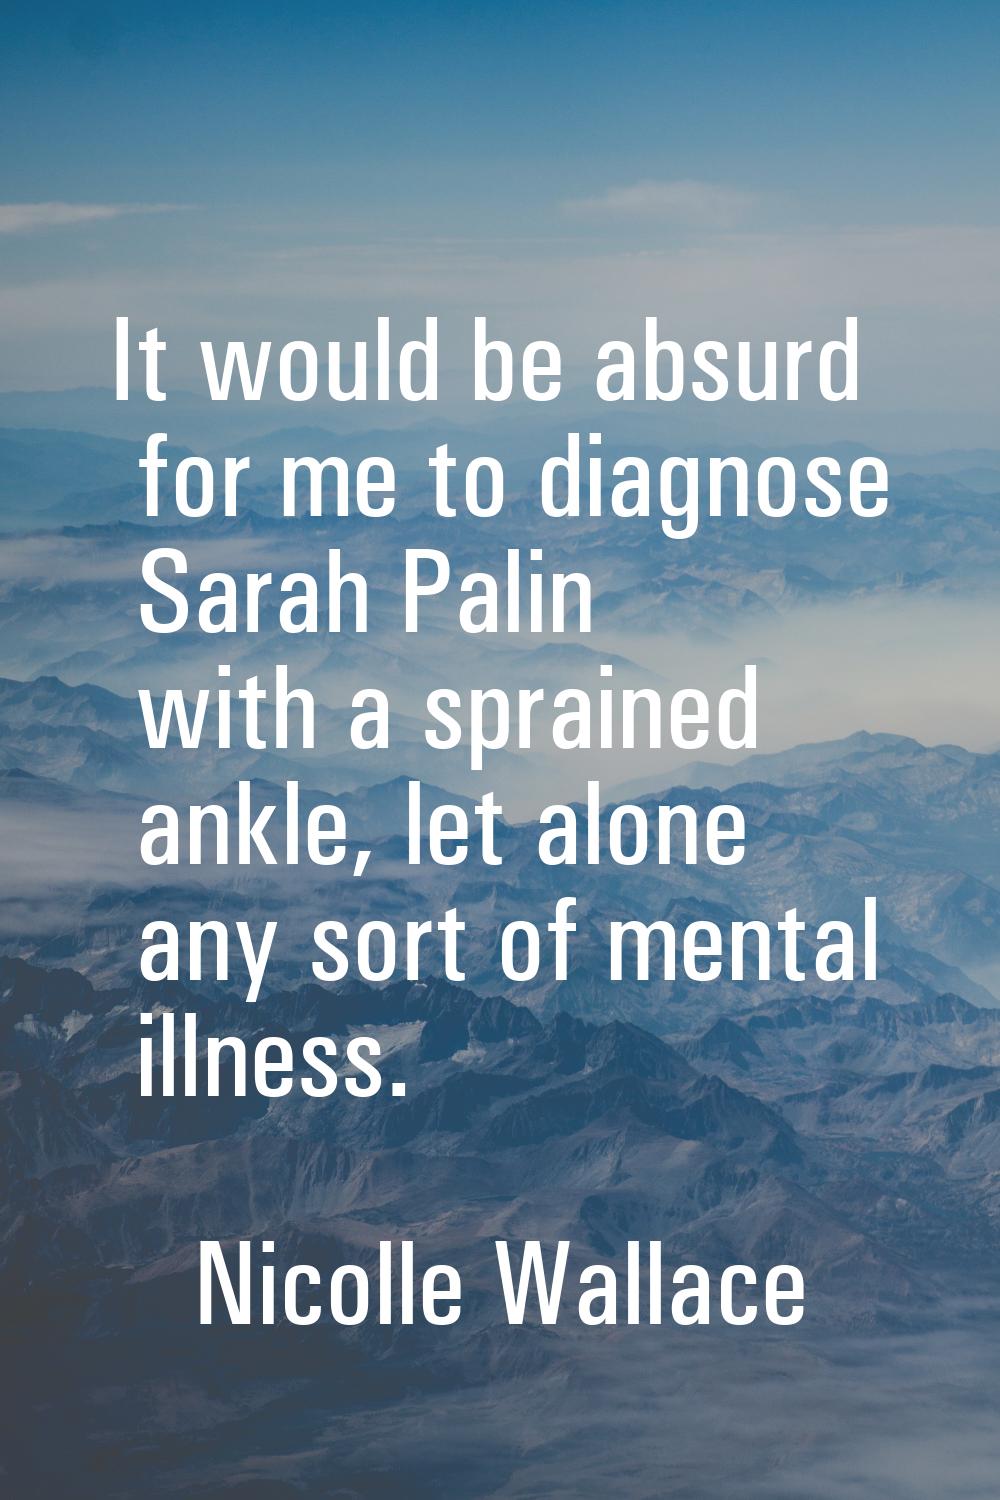 It would be absurd for me to diagnose Sarah Palin with a sprained ankle, let alone any sort of ment